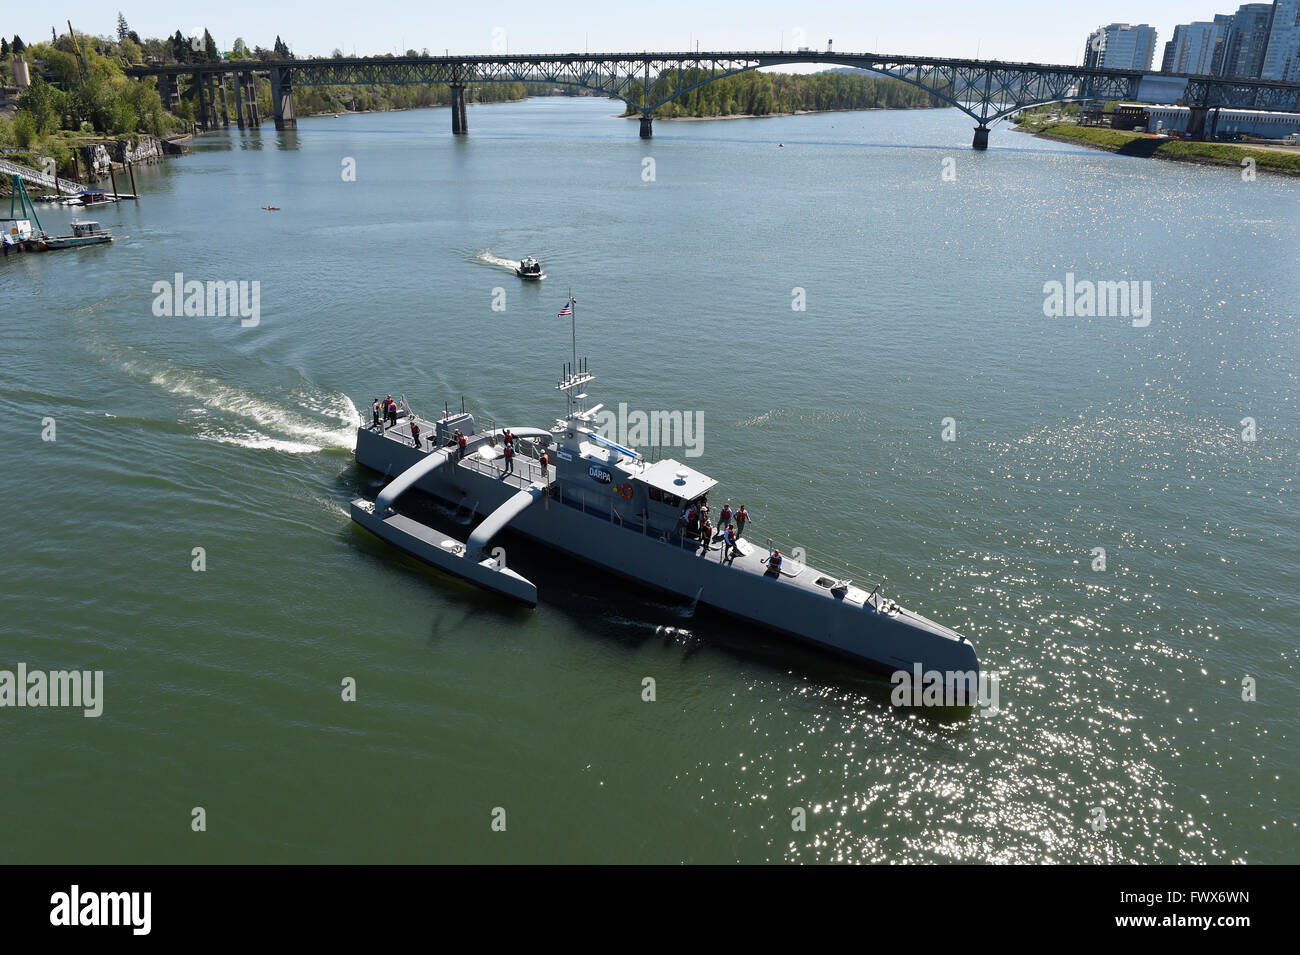 U.S Navy ship Sea Hunter, an entirely new class of unmanned ocean-going vessel gets underway on the Williammette River following a christening ceremony April 7, 2016 in Portland, Oregon. The 130-foot drone sea craft is being developed to hunt for submarines and mines at sea. Stock Photo